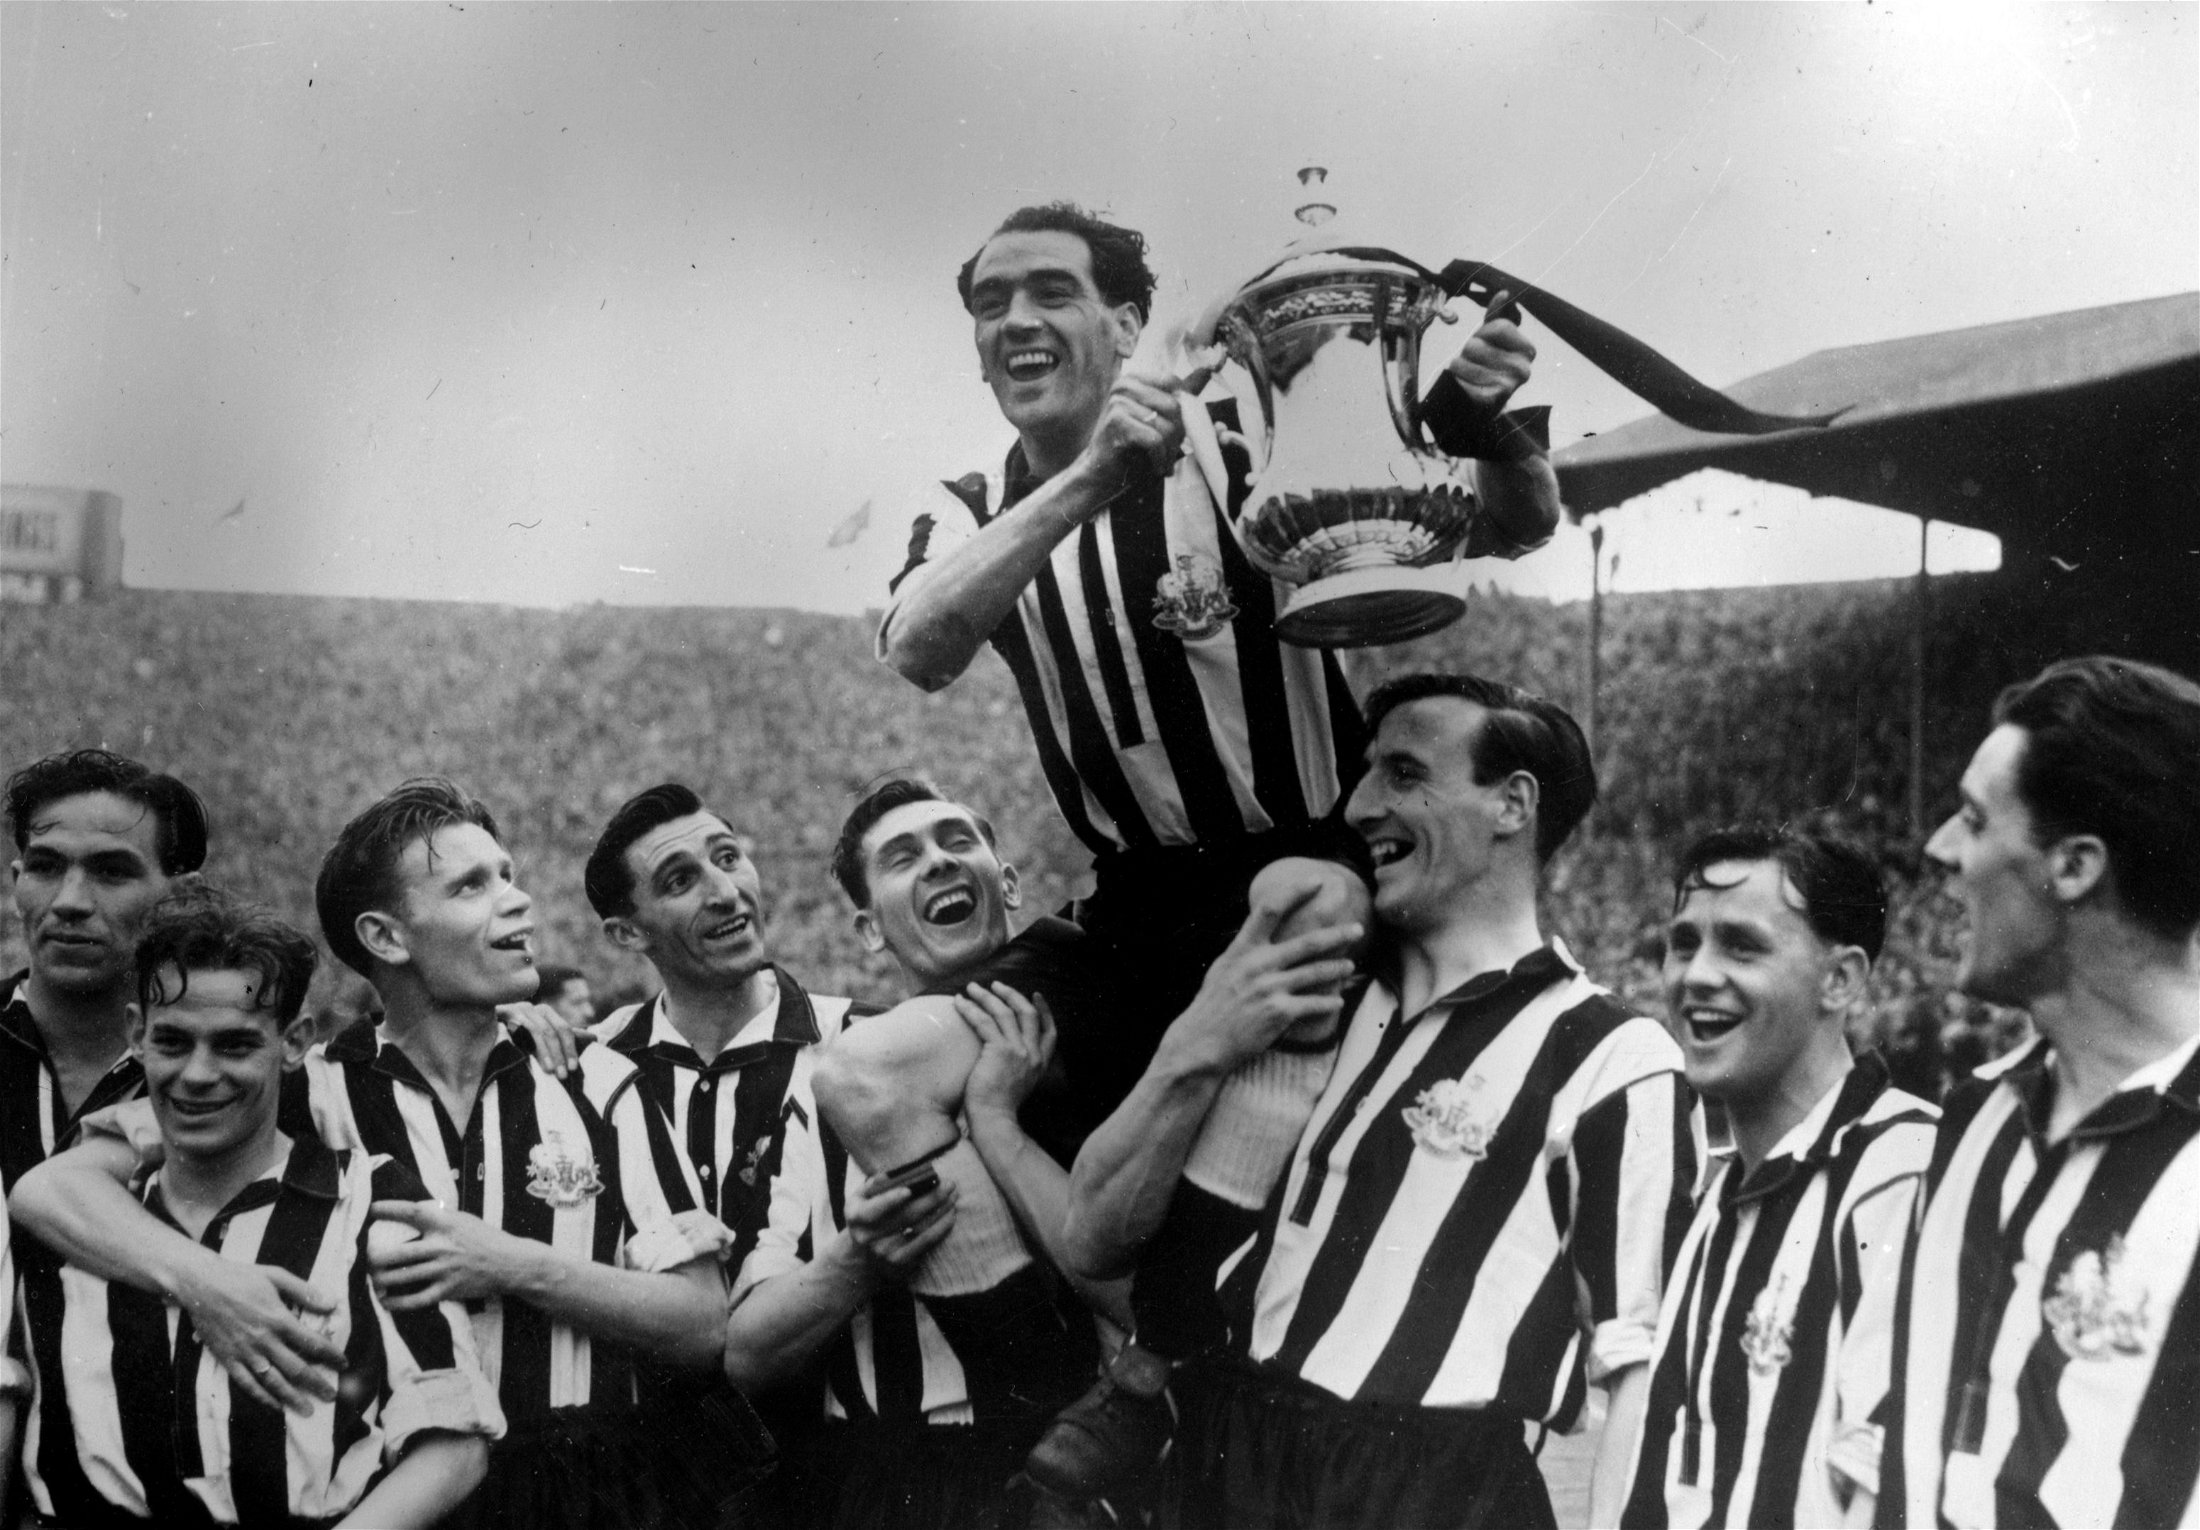 9. Newcastle United - 11 trophies - Read Liverpool